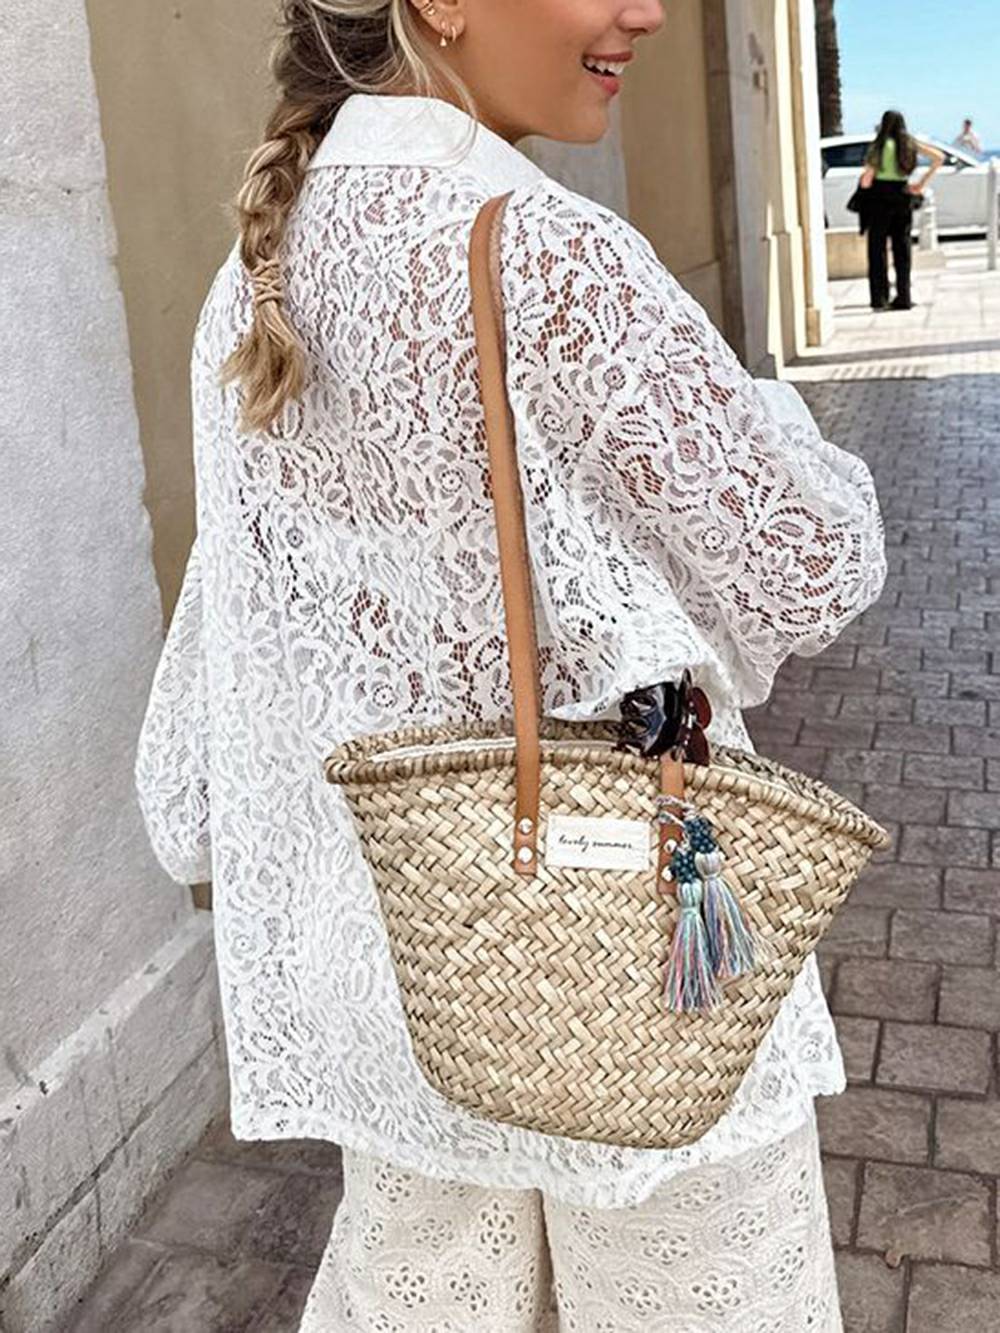 Floral Lace Cover Up Shirt